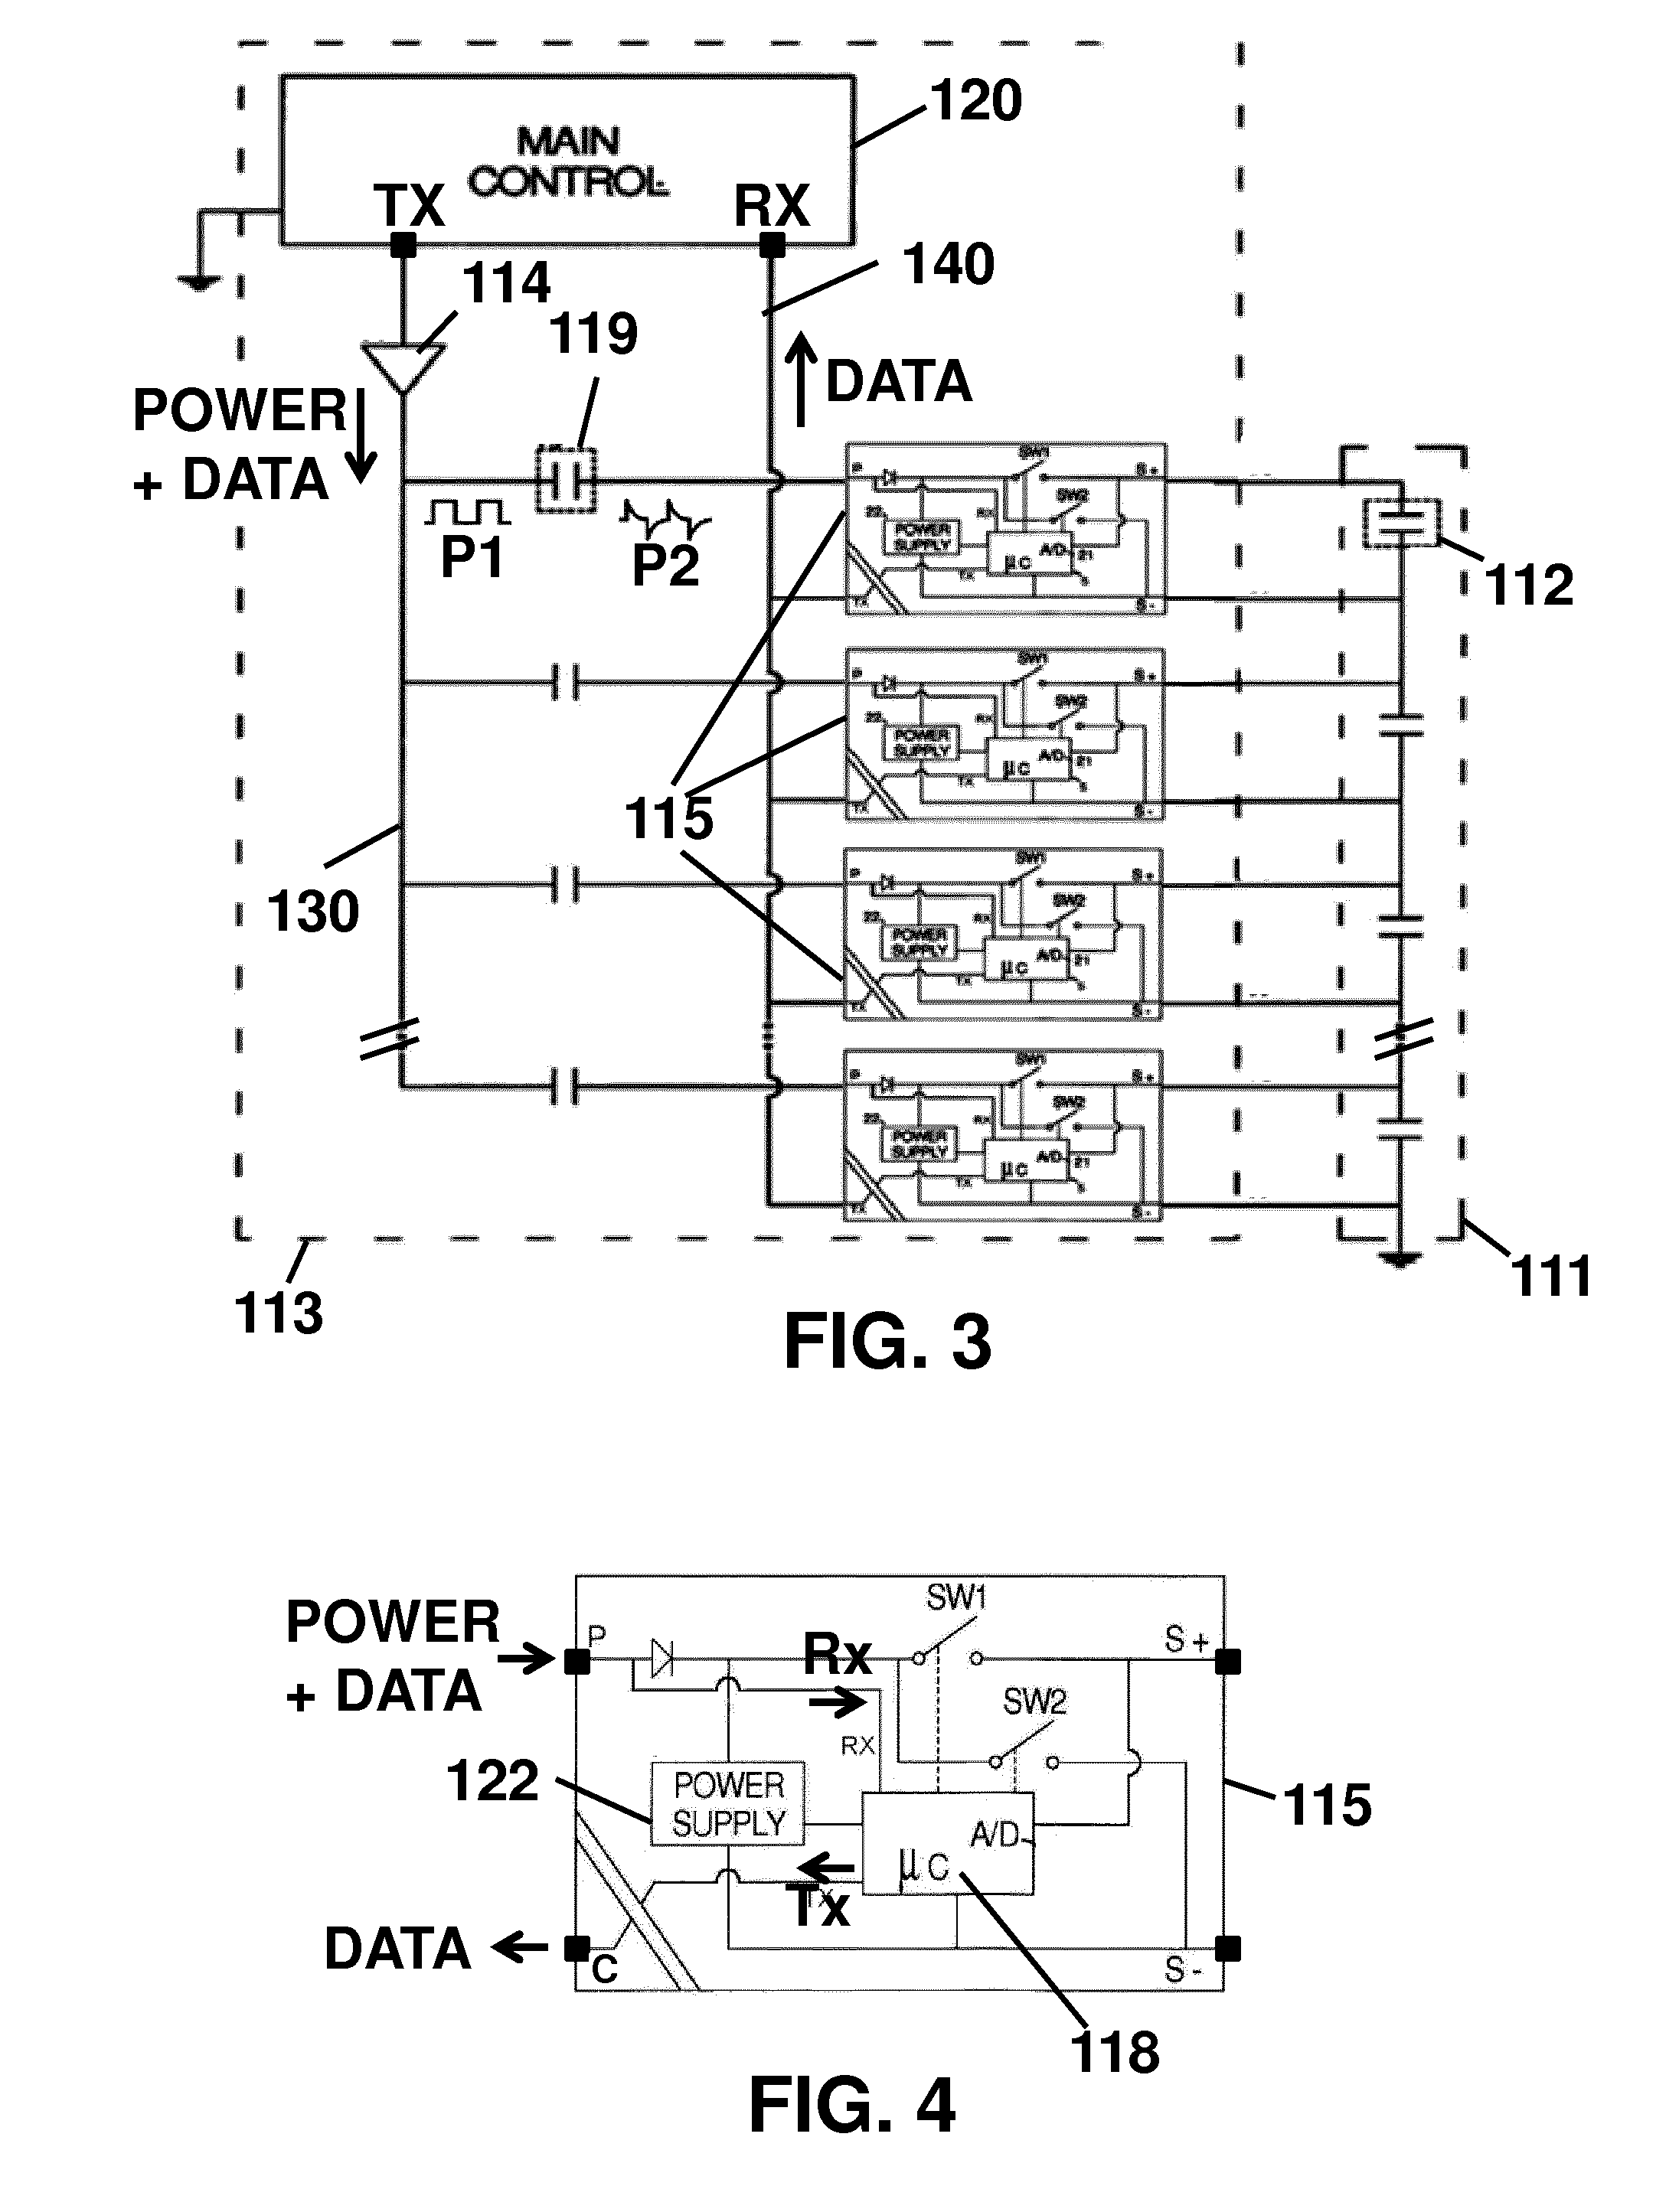 Method and system for providing pulsed power and data on a bus